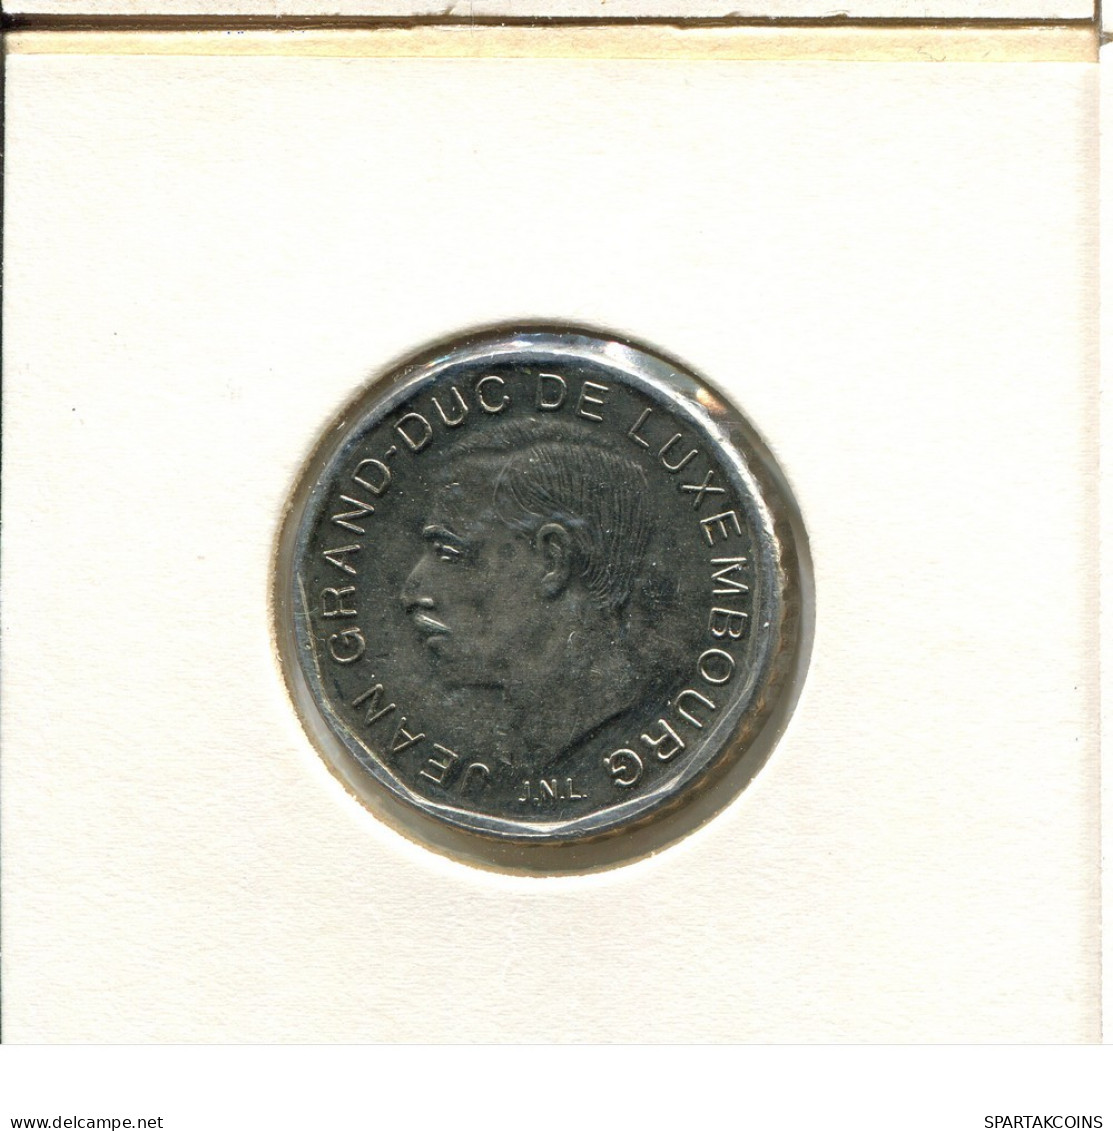 50 FRANCS 1987 LUXEMBOURG Coin #BA054.U.A - Luxembourg